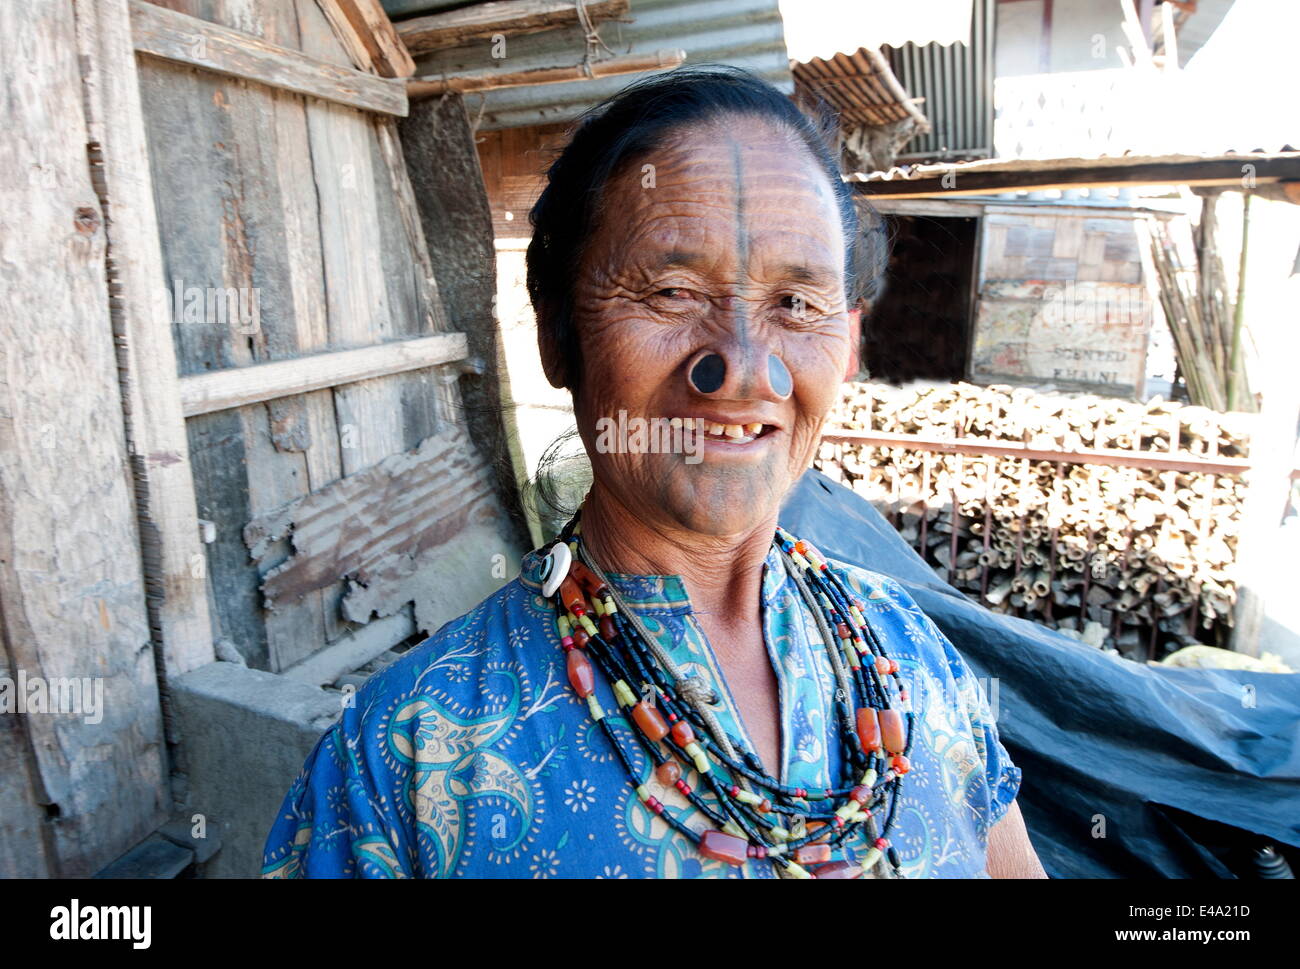 Apatani tribal woman with traditional yaping hullo (nose plugs) and facial tatooing and a crucifix, Arunachal Pradesh, India Stock Photo